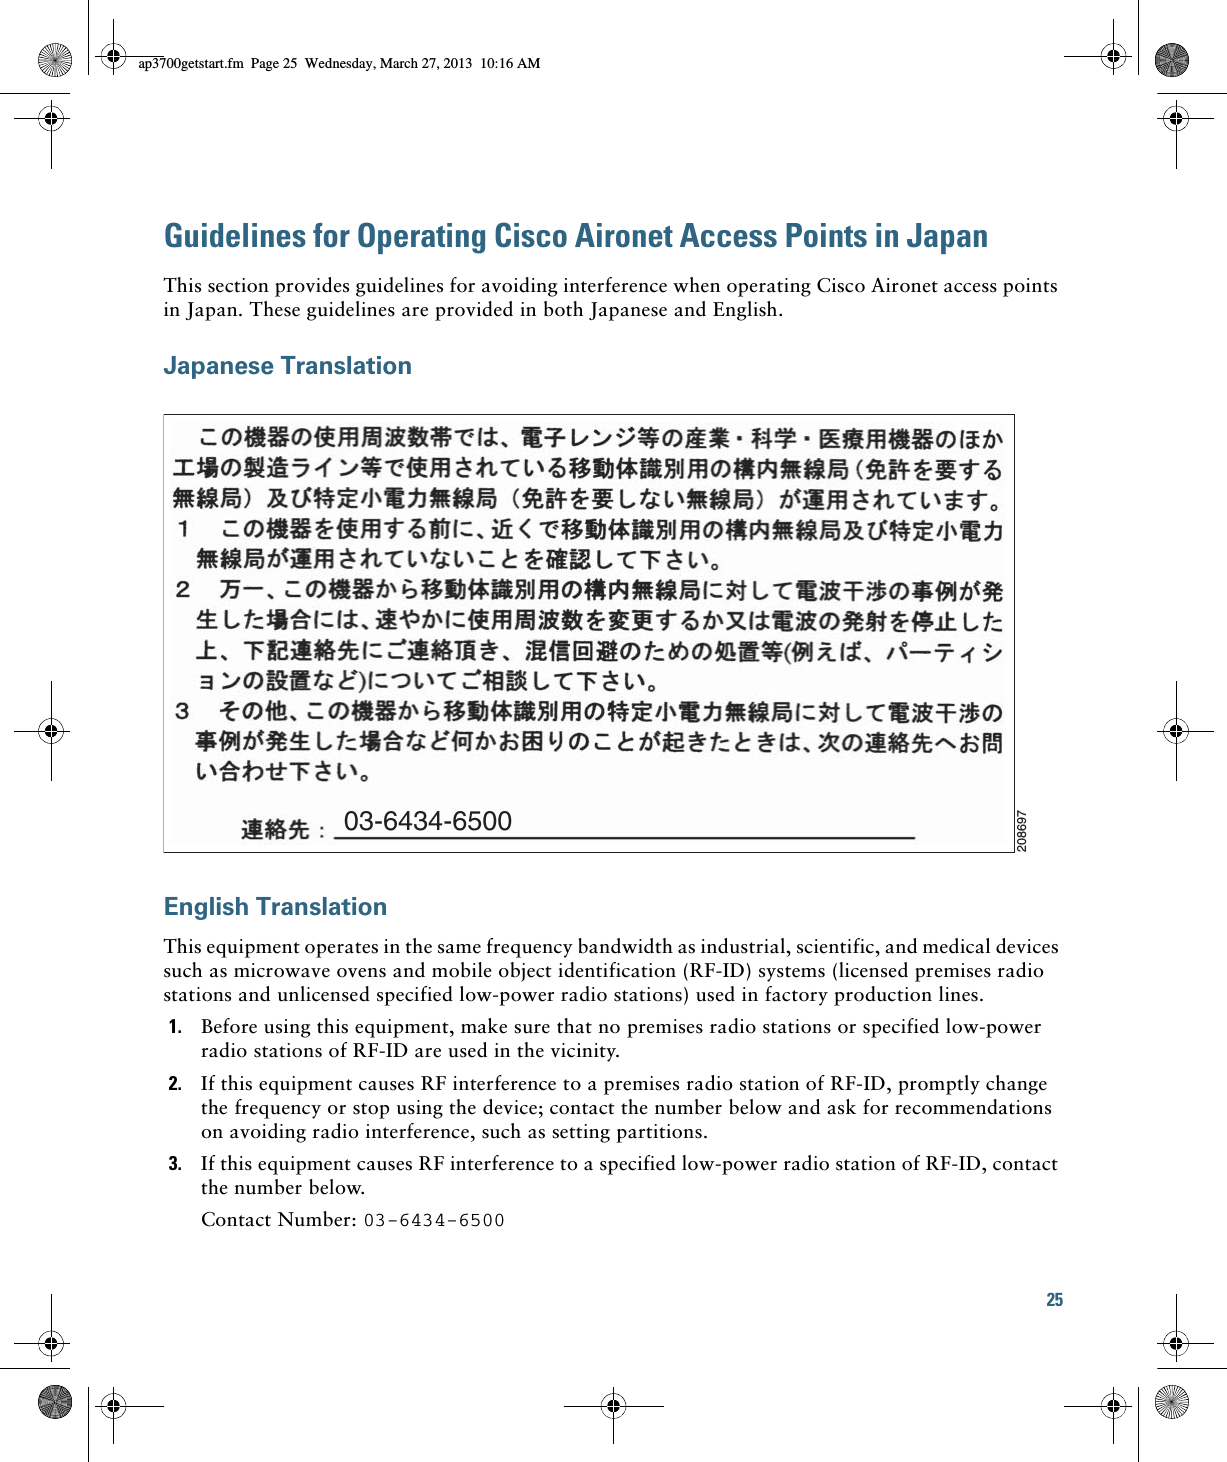 25 Guidelines for Operating Cisco Aironet Access Points in JapanThis section provides guidelines for avoiding interference when operating Cisco Aironet access points in Japan. These guidelines are provided in both Japanese and English.Japanese TranslationEnglish TranslationThis equipment operates in the same frequency bandwidth as industrial, scientific, and medical devices such as microwave ovens and mobile object identification (RF-ID) systems (licensed premises radio stations and unlicensed specified low-power radio stations) used in factory production lines.1. Before using this equipment, make sure that no premises radio stations or specified low-power radio stations of RF-ID are used in the vicinity.2. If this equipment causes RF interference to a premises radio station of RF-ID, promptly change the frequency or stop using the device; contact the number below and ask for recommendations on avoiding radio interference, such as setting partitions.3. If this equipment causes RF interference to a specified low-power radio station of RF-ID, contact the number below.Contact Number: 03-6434-650003-6434-6500208697ap3700getstart.fm  Page 25  Wednesday, March 27, 2013  10:16 AM